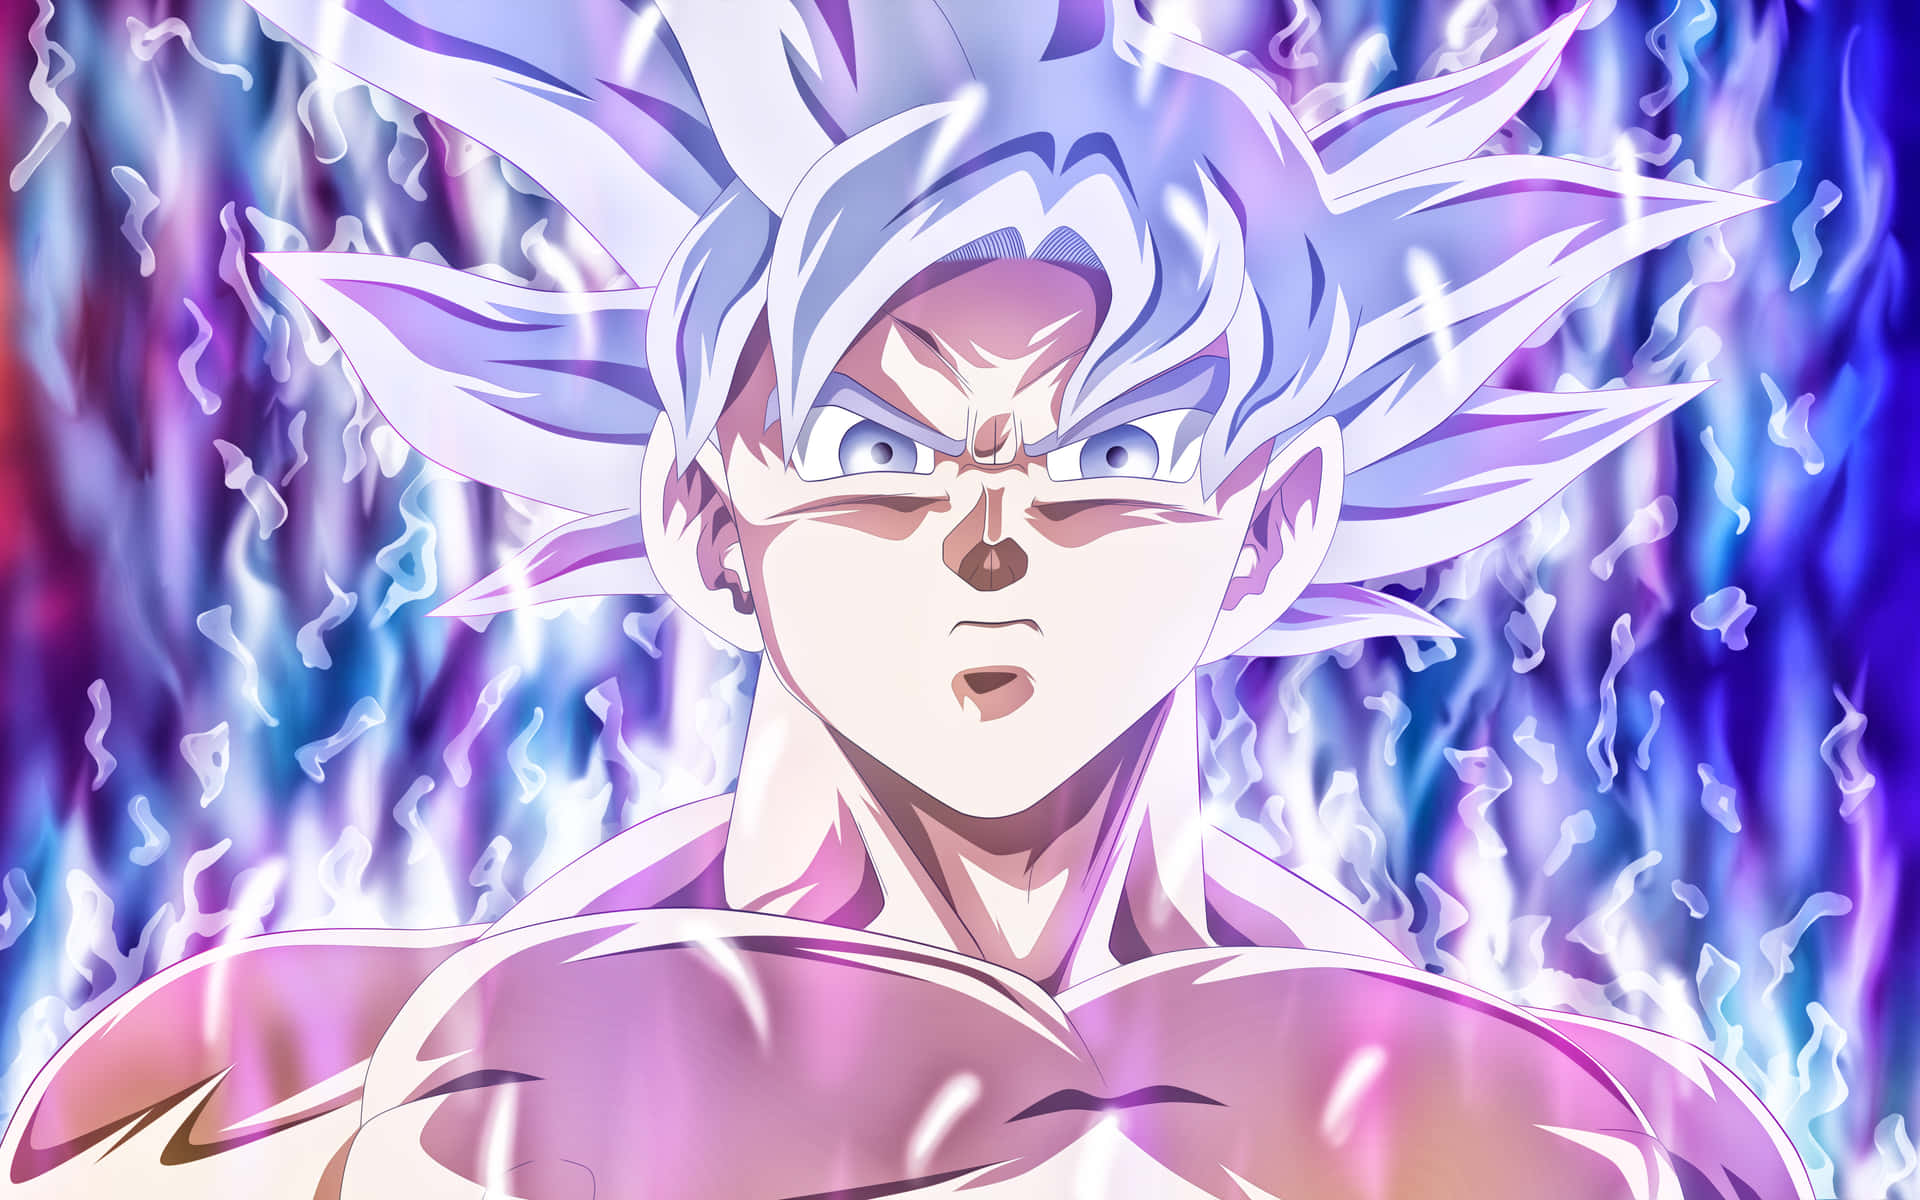 Mui Goku, Ready to Battle with the Power of the Galaxy! Wallpaper